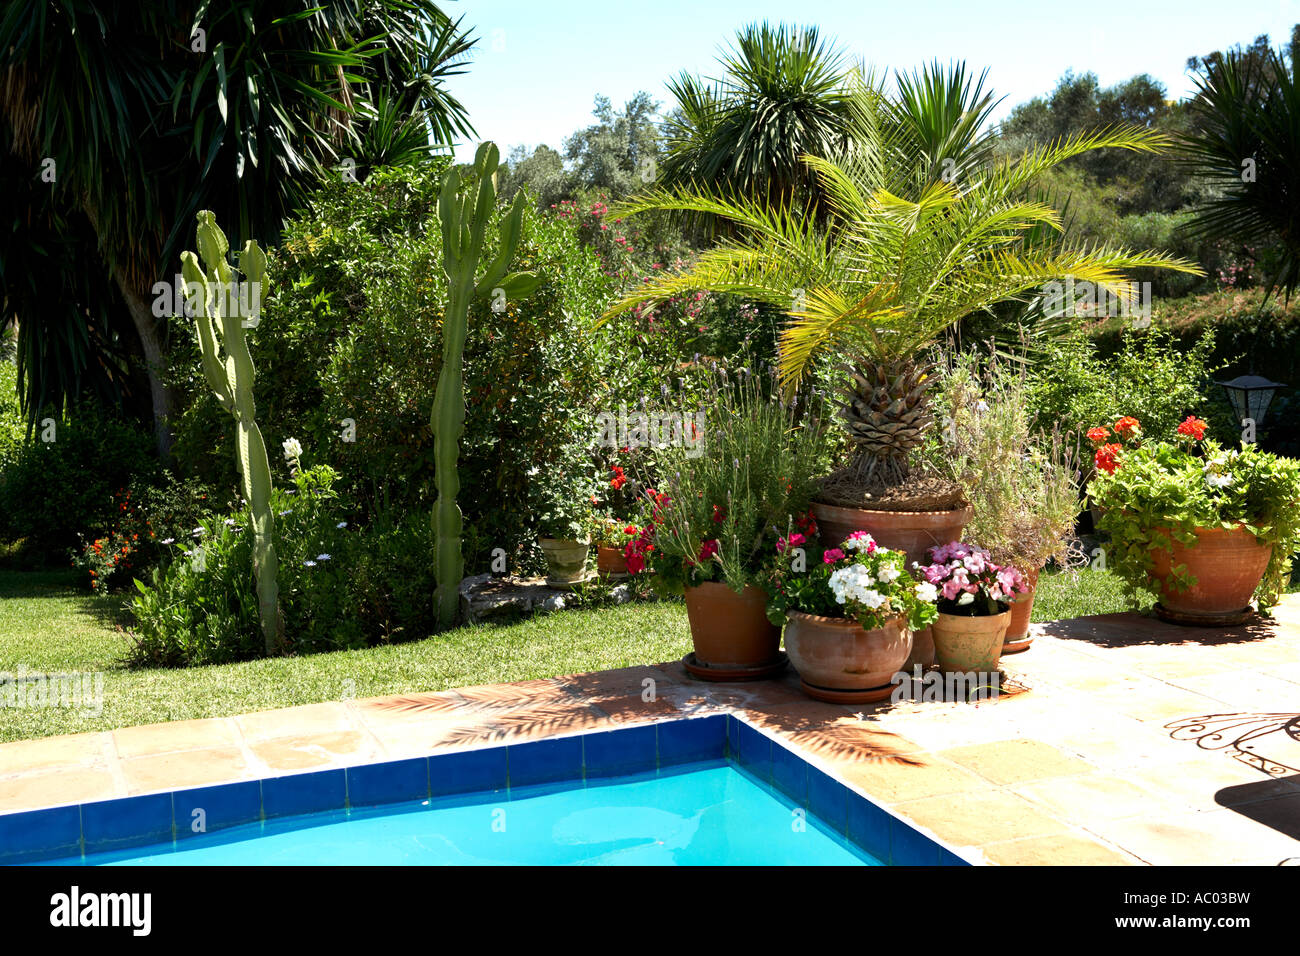 Typical Andalucian Garden View, Marbella, Spain Stock Photo